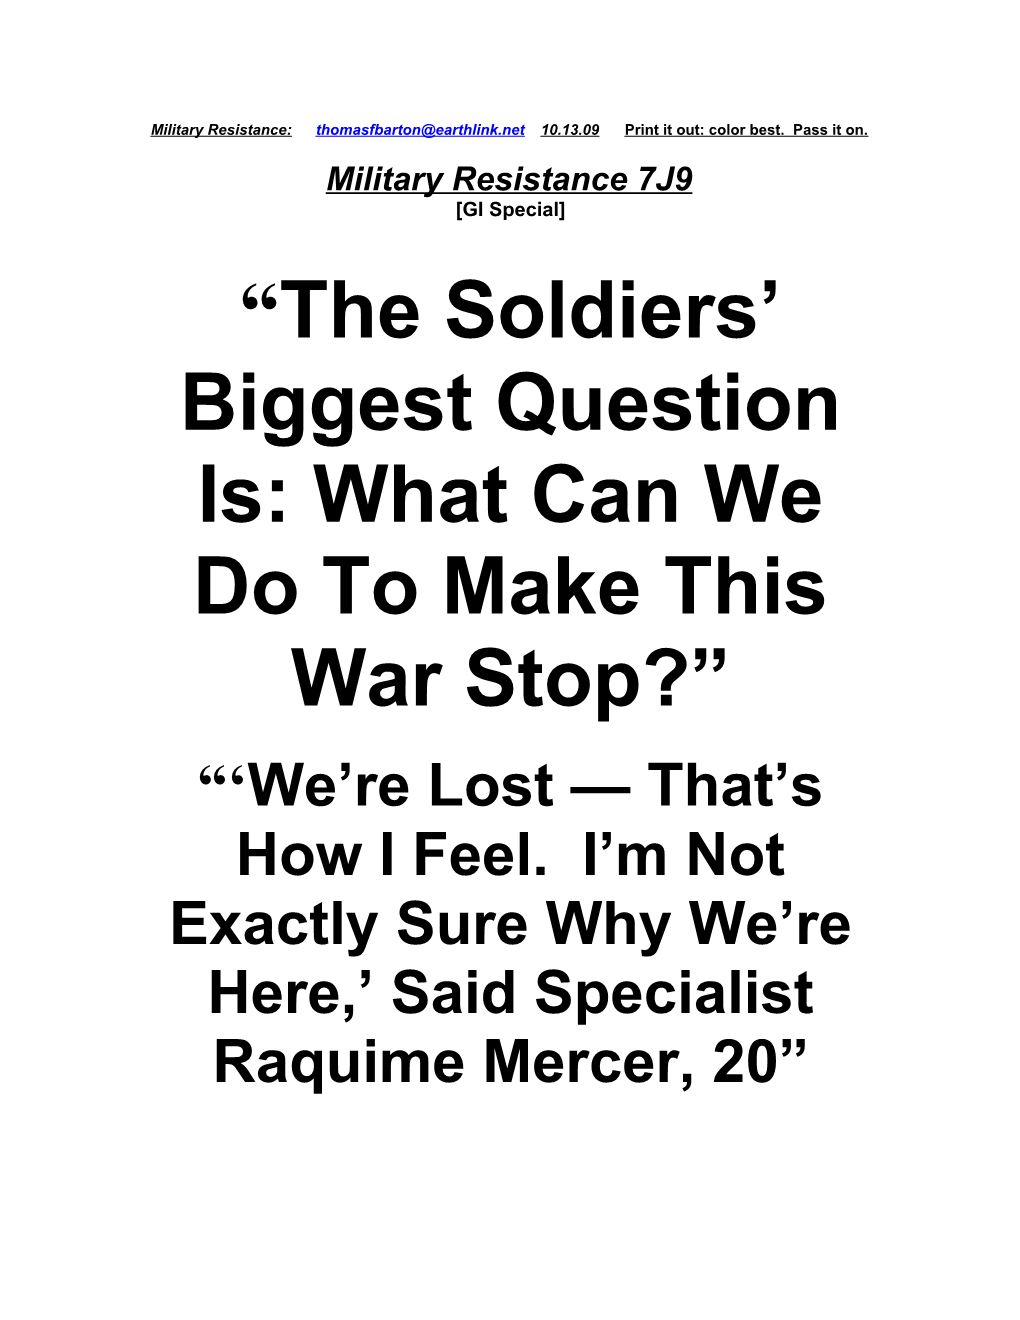 The Soldiers Biggest Question Is: What Can We Do to Make This War Stop?